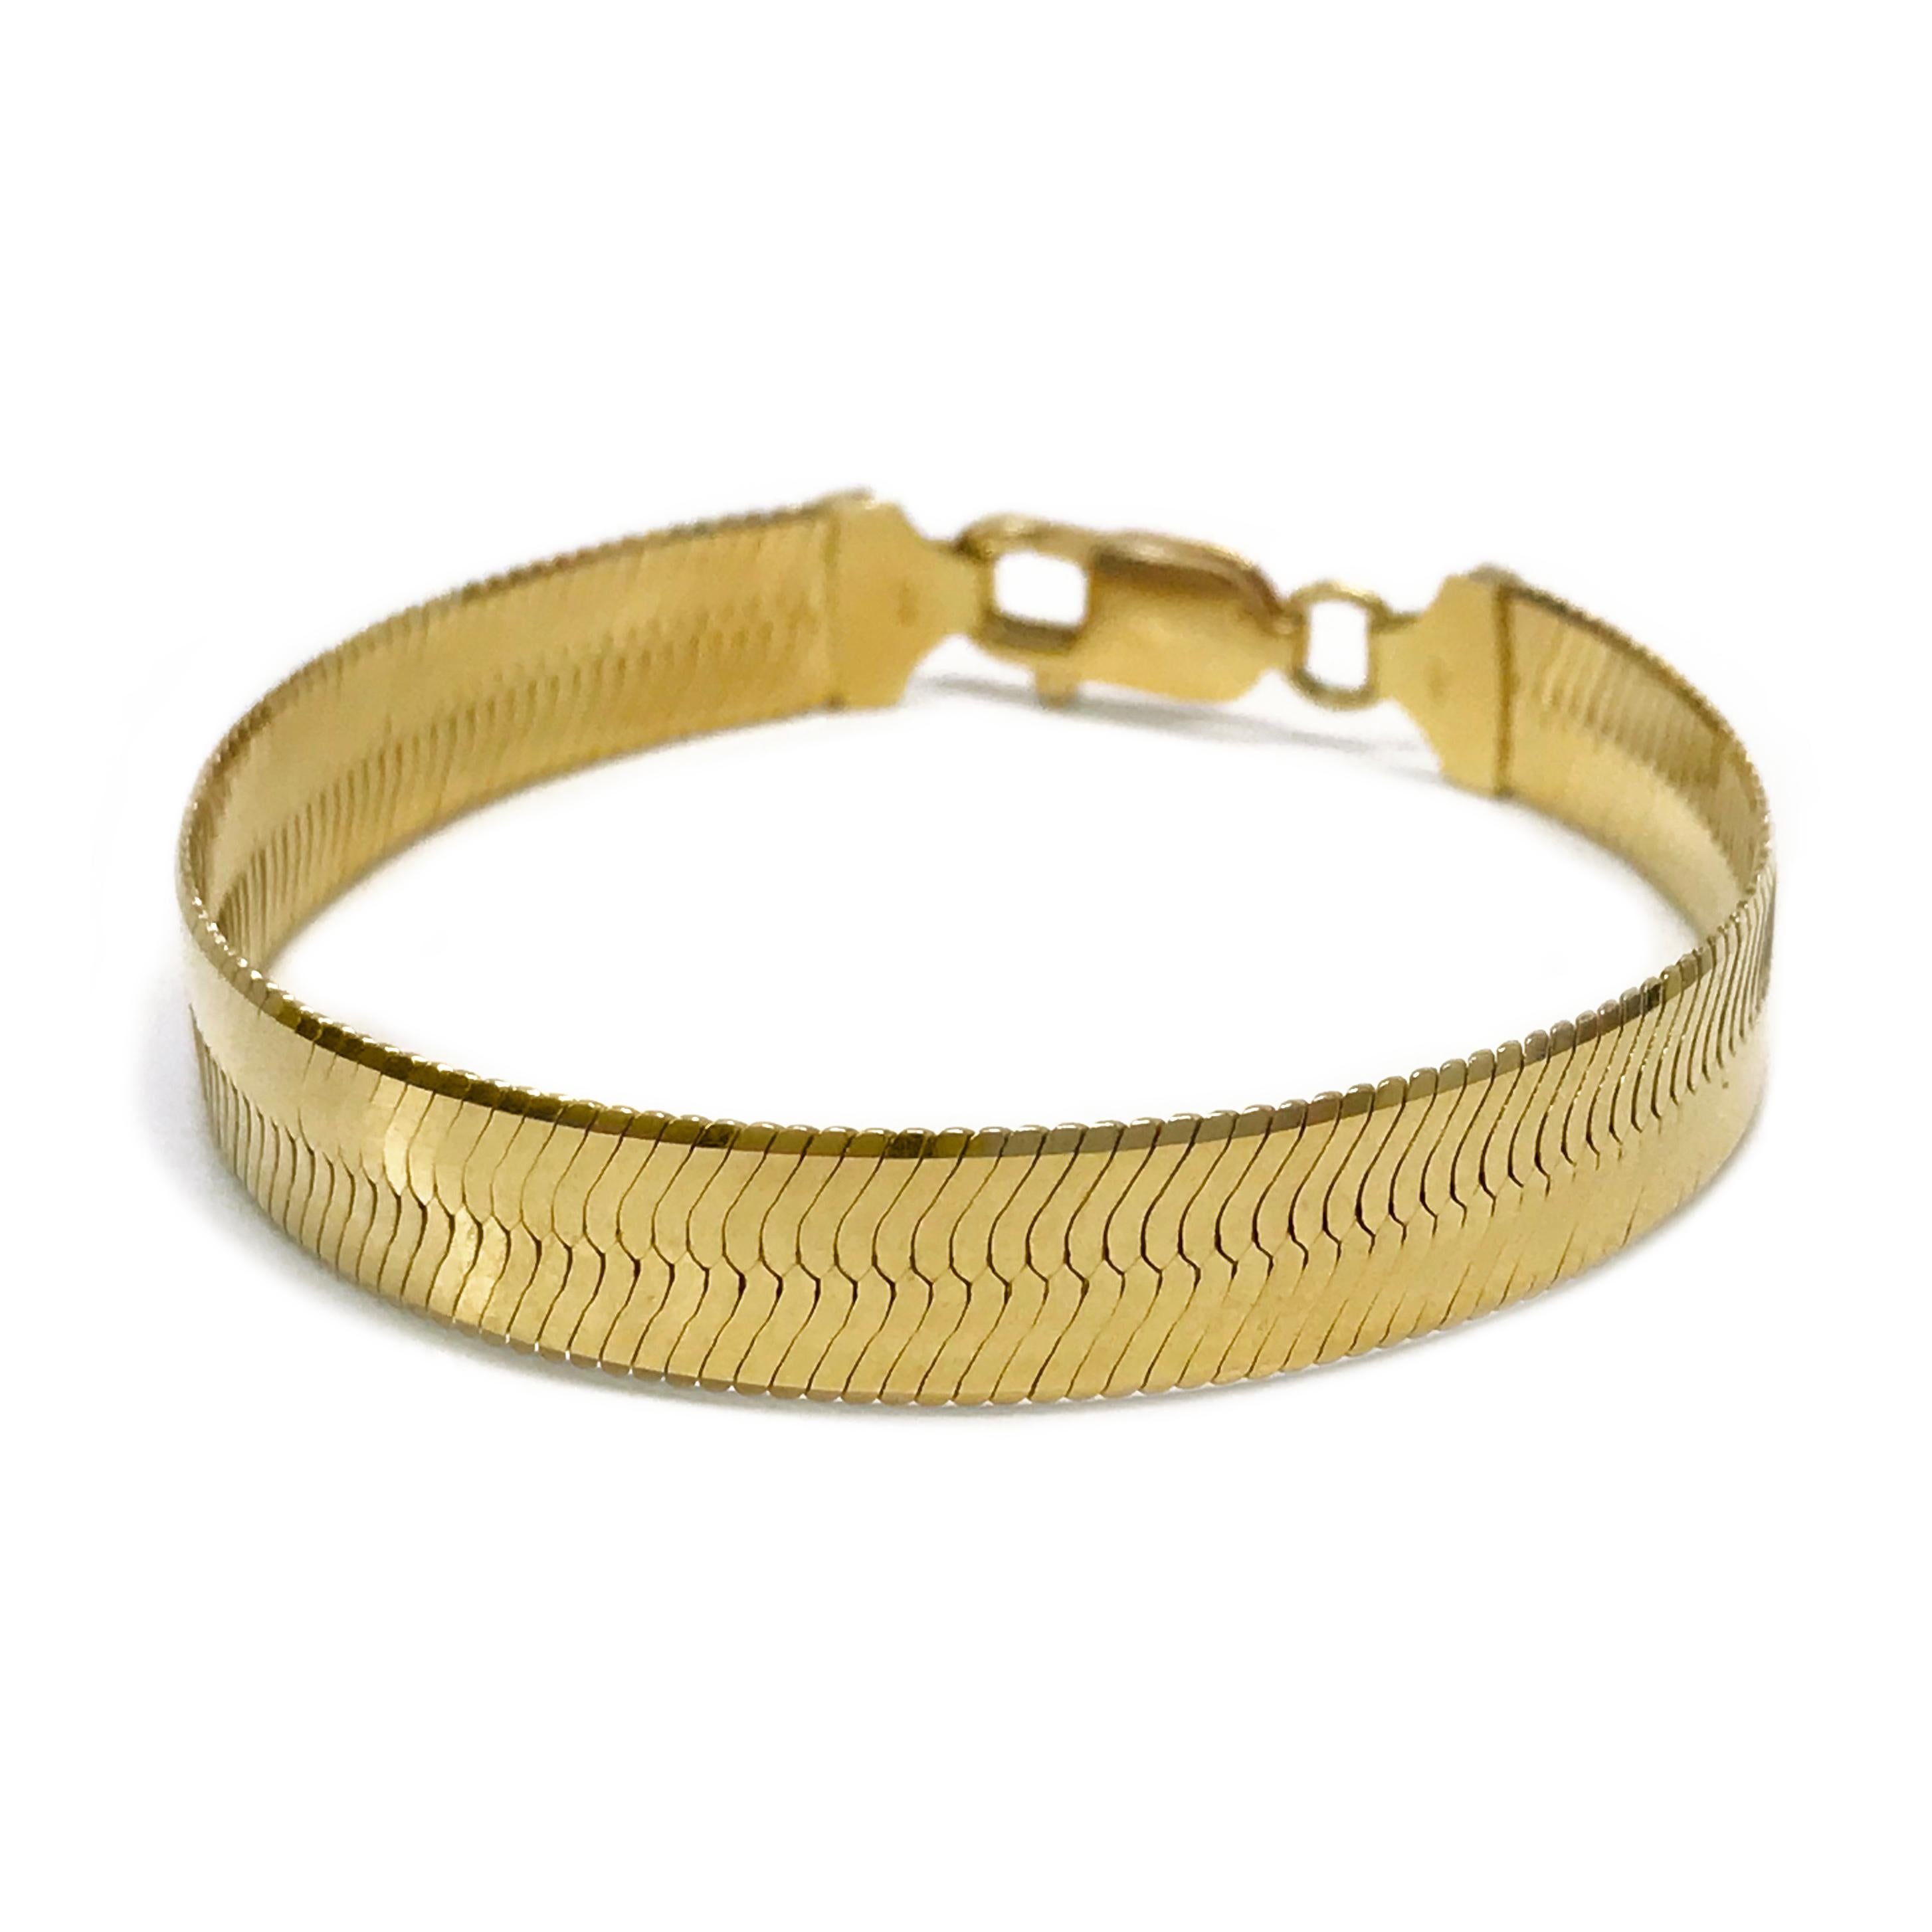 14 Karat Yellow Gold Herringbone Bracelet. The bracelet is 9mm wide. Stamped on the inside of the clasp is 750 ITALY. The bracelet is 7